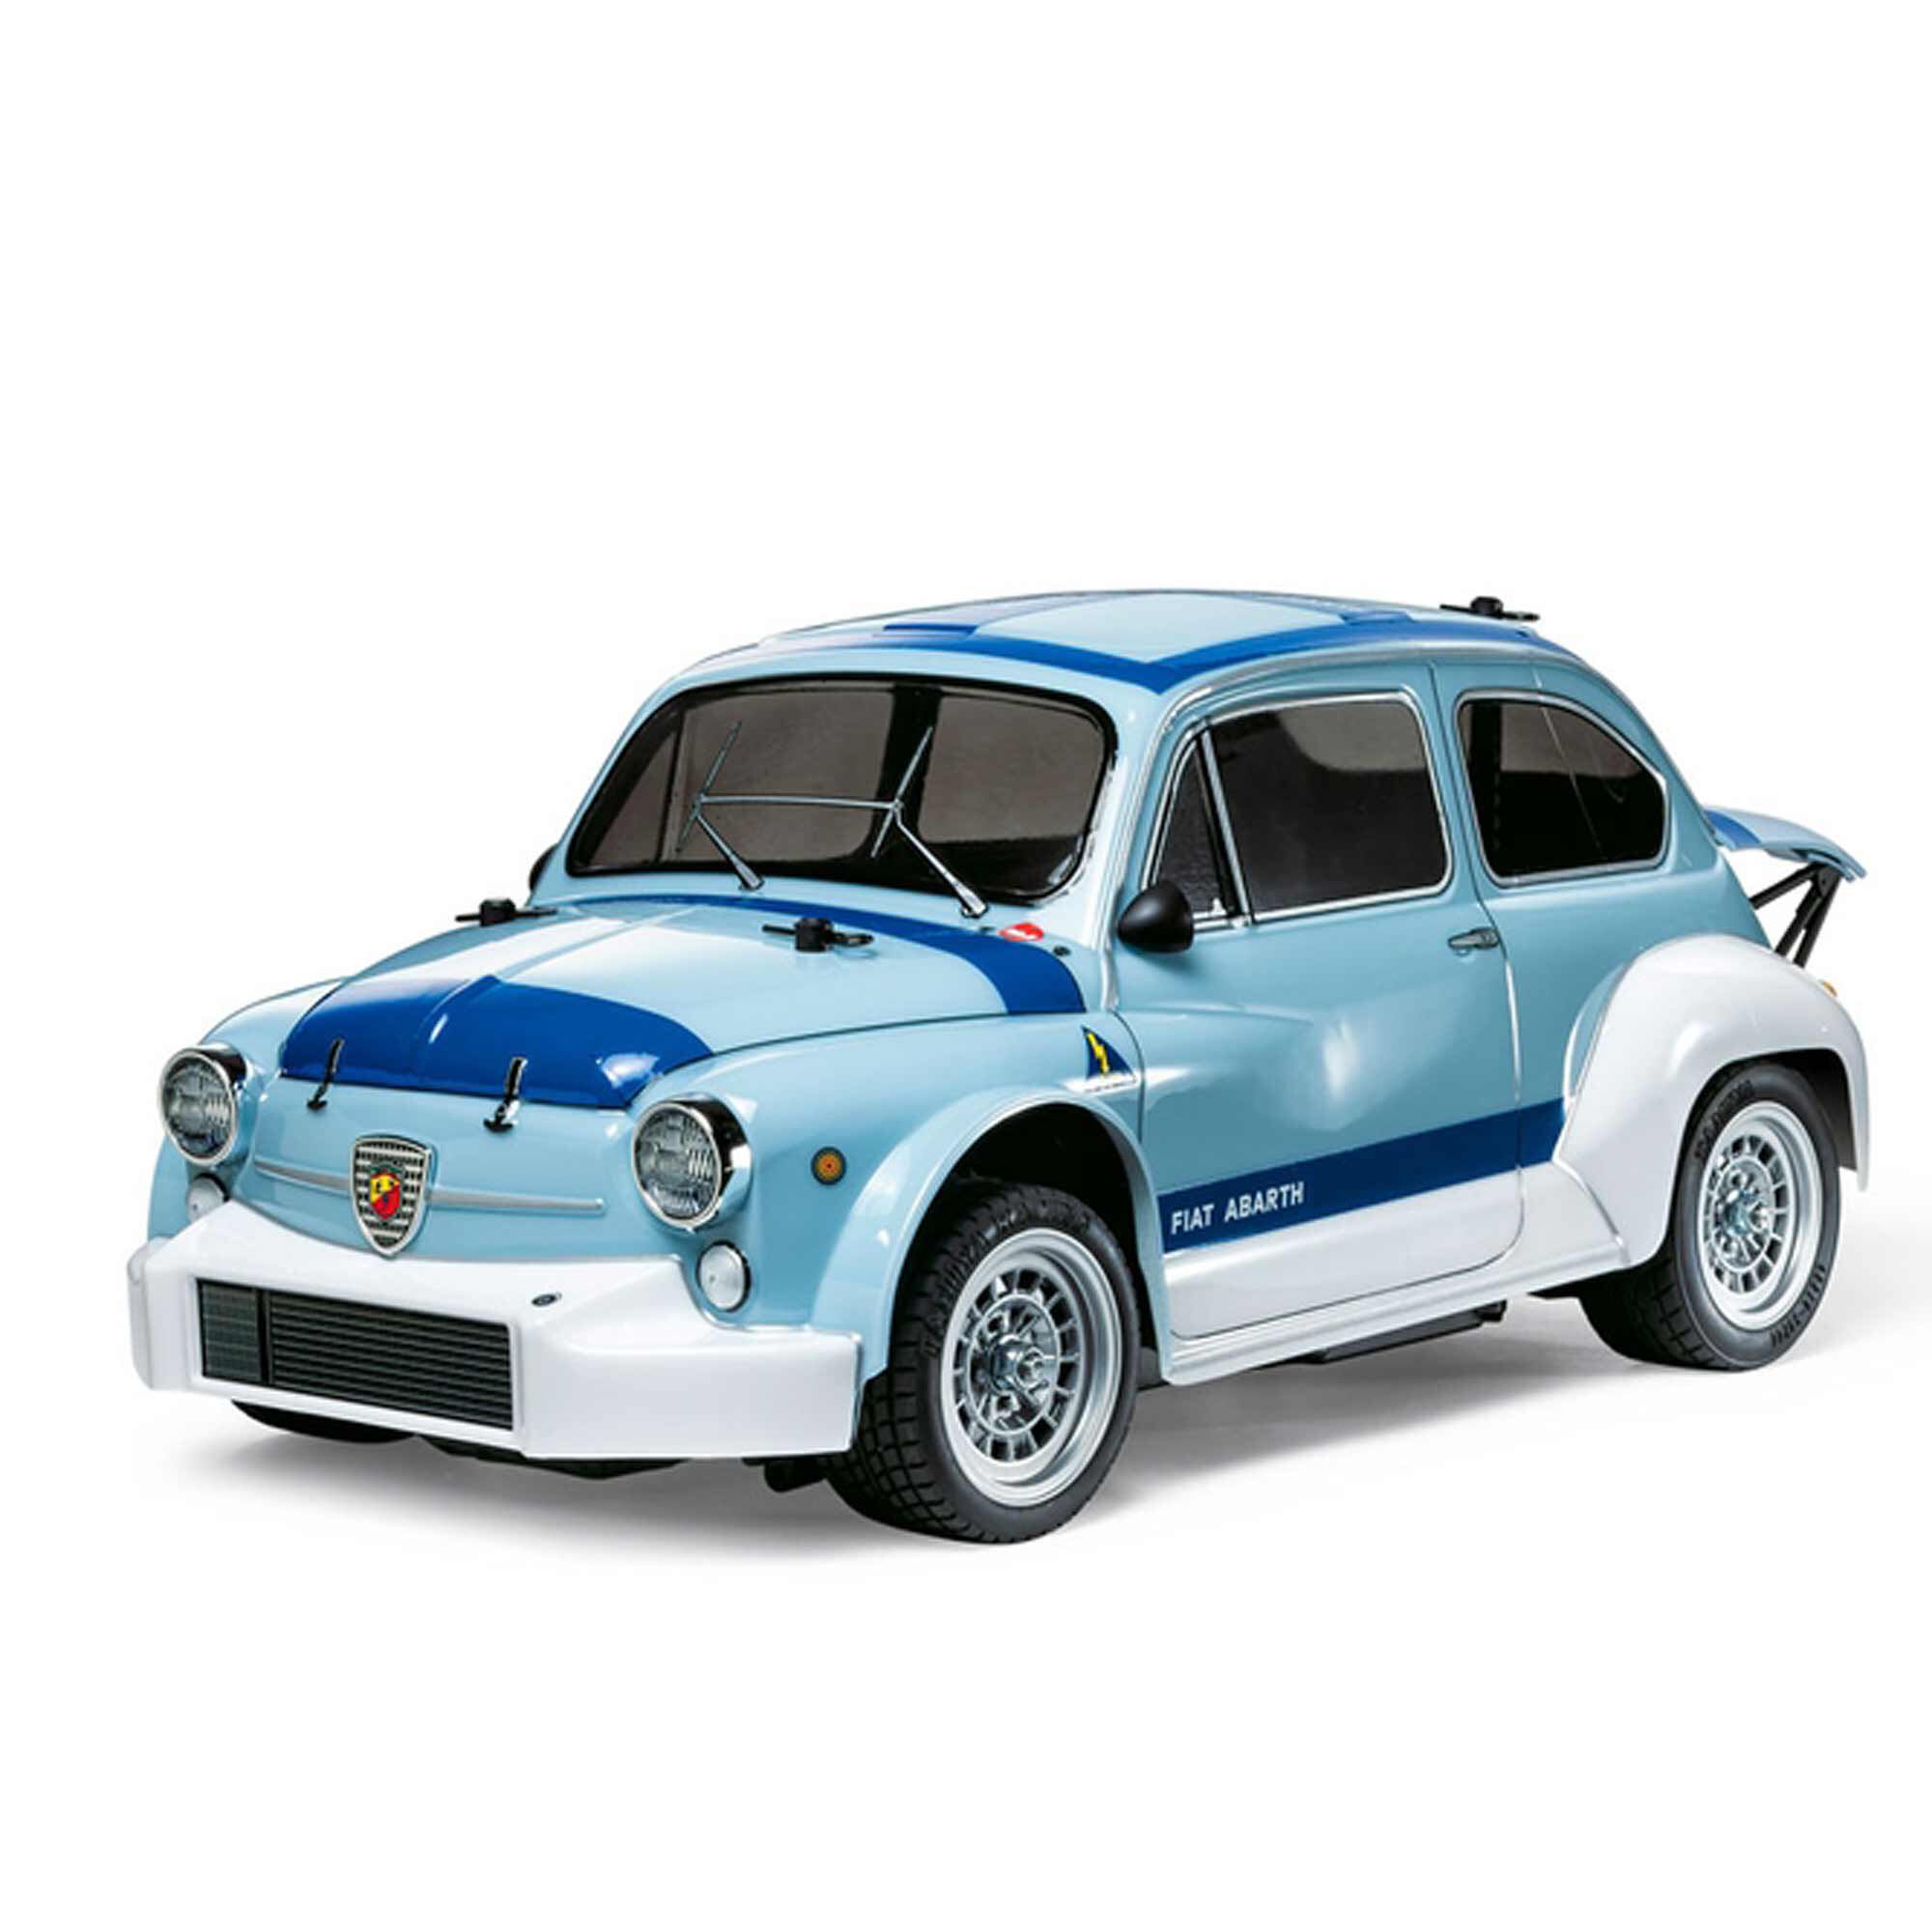 1/10 Fiat Abarth 1000 TCR Berlina Corse MB-01 On-Road Touring Kit,  Blue-Gray Painted Body